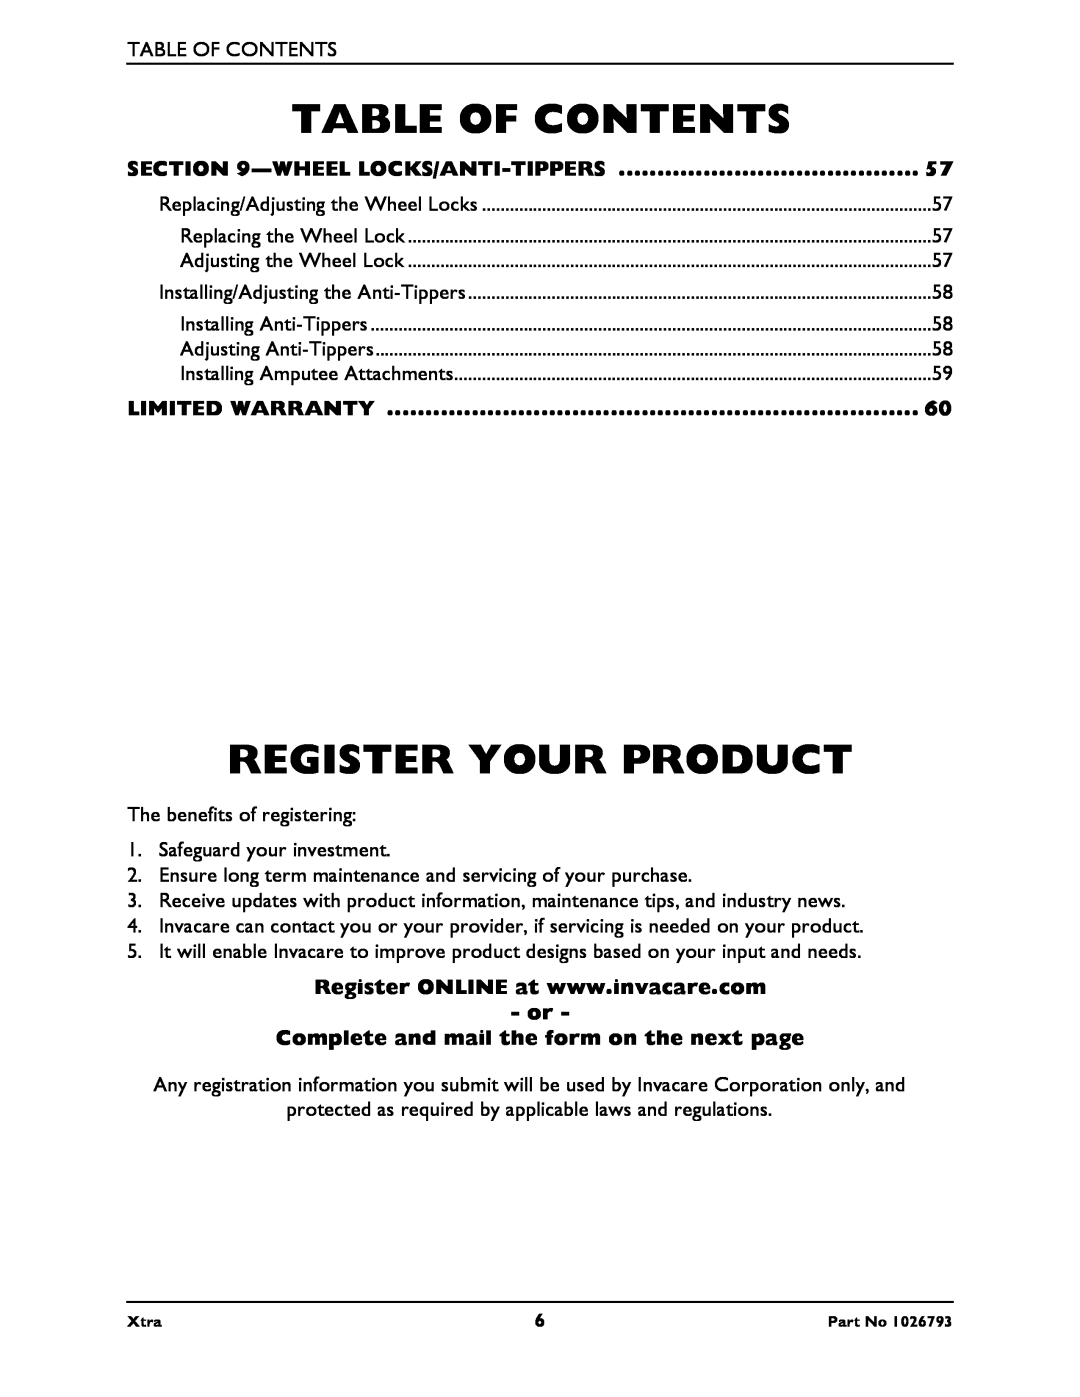 Invacare 1026793 manual Register Your Product, Table Of Contents, Wheel Locks/Anti-Tippers, Limited Warranty 